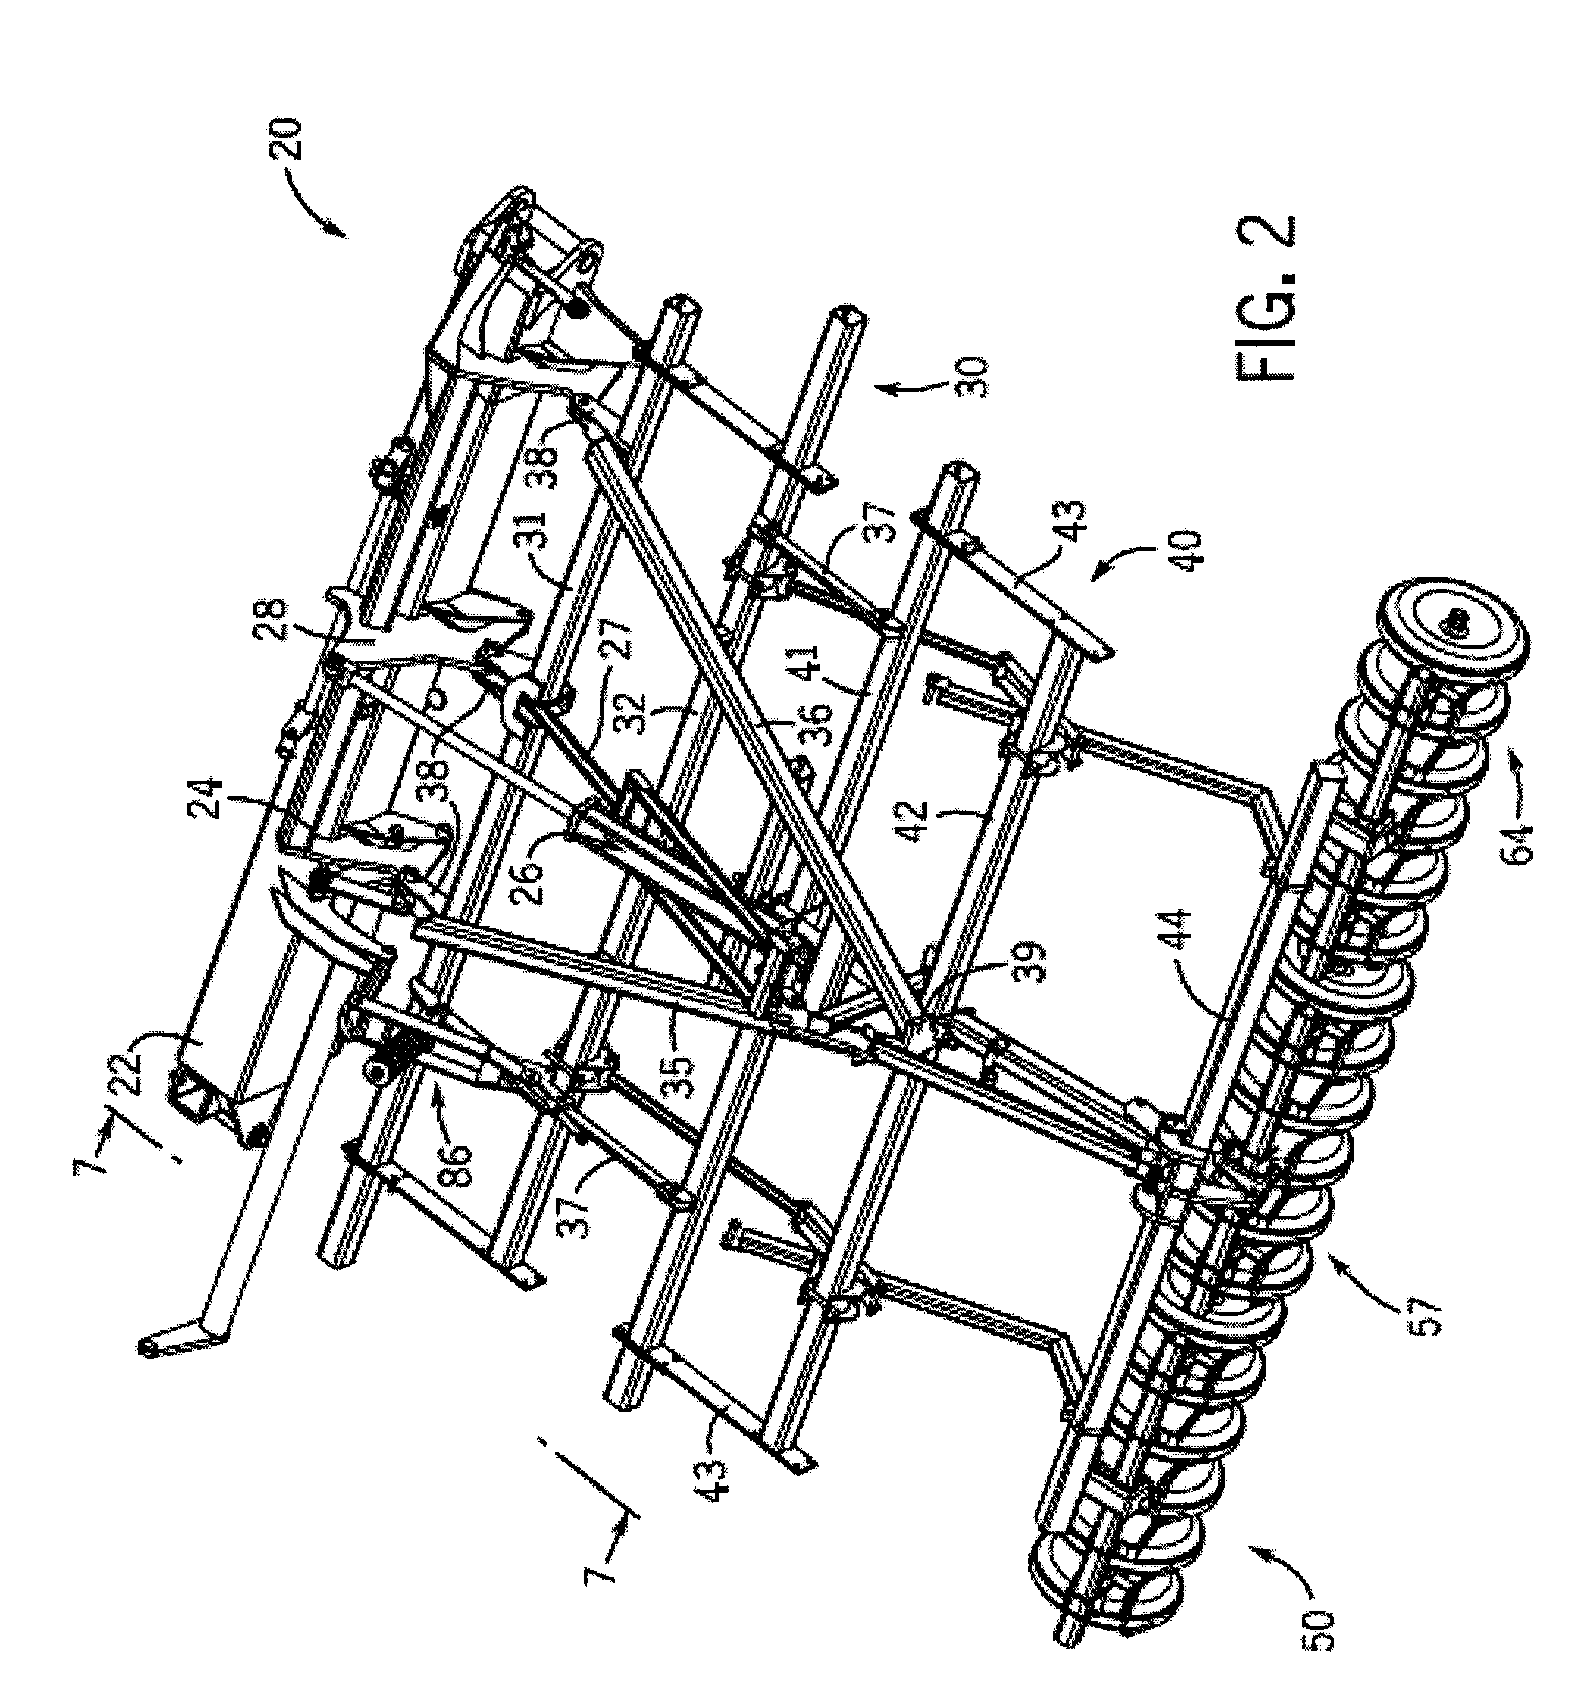 Tillage apparatus having flexible frame and weight distribution system